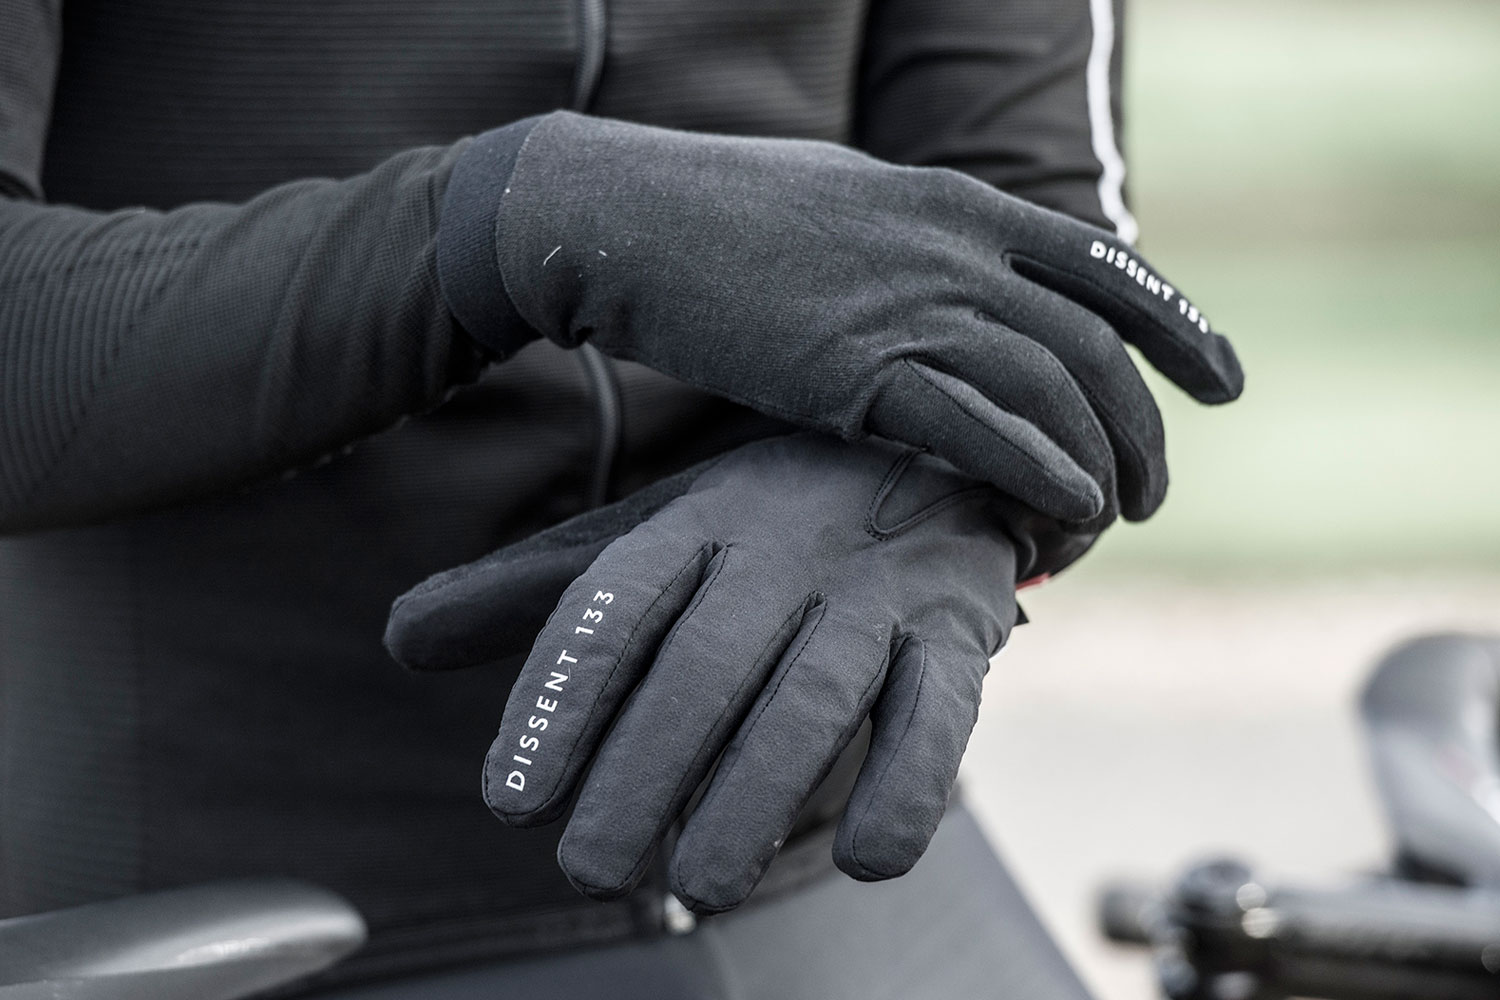 Dissent 133 by TheRiderFirm layered winter biking gloves wet cold cycling glove system layers